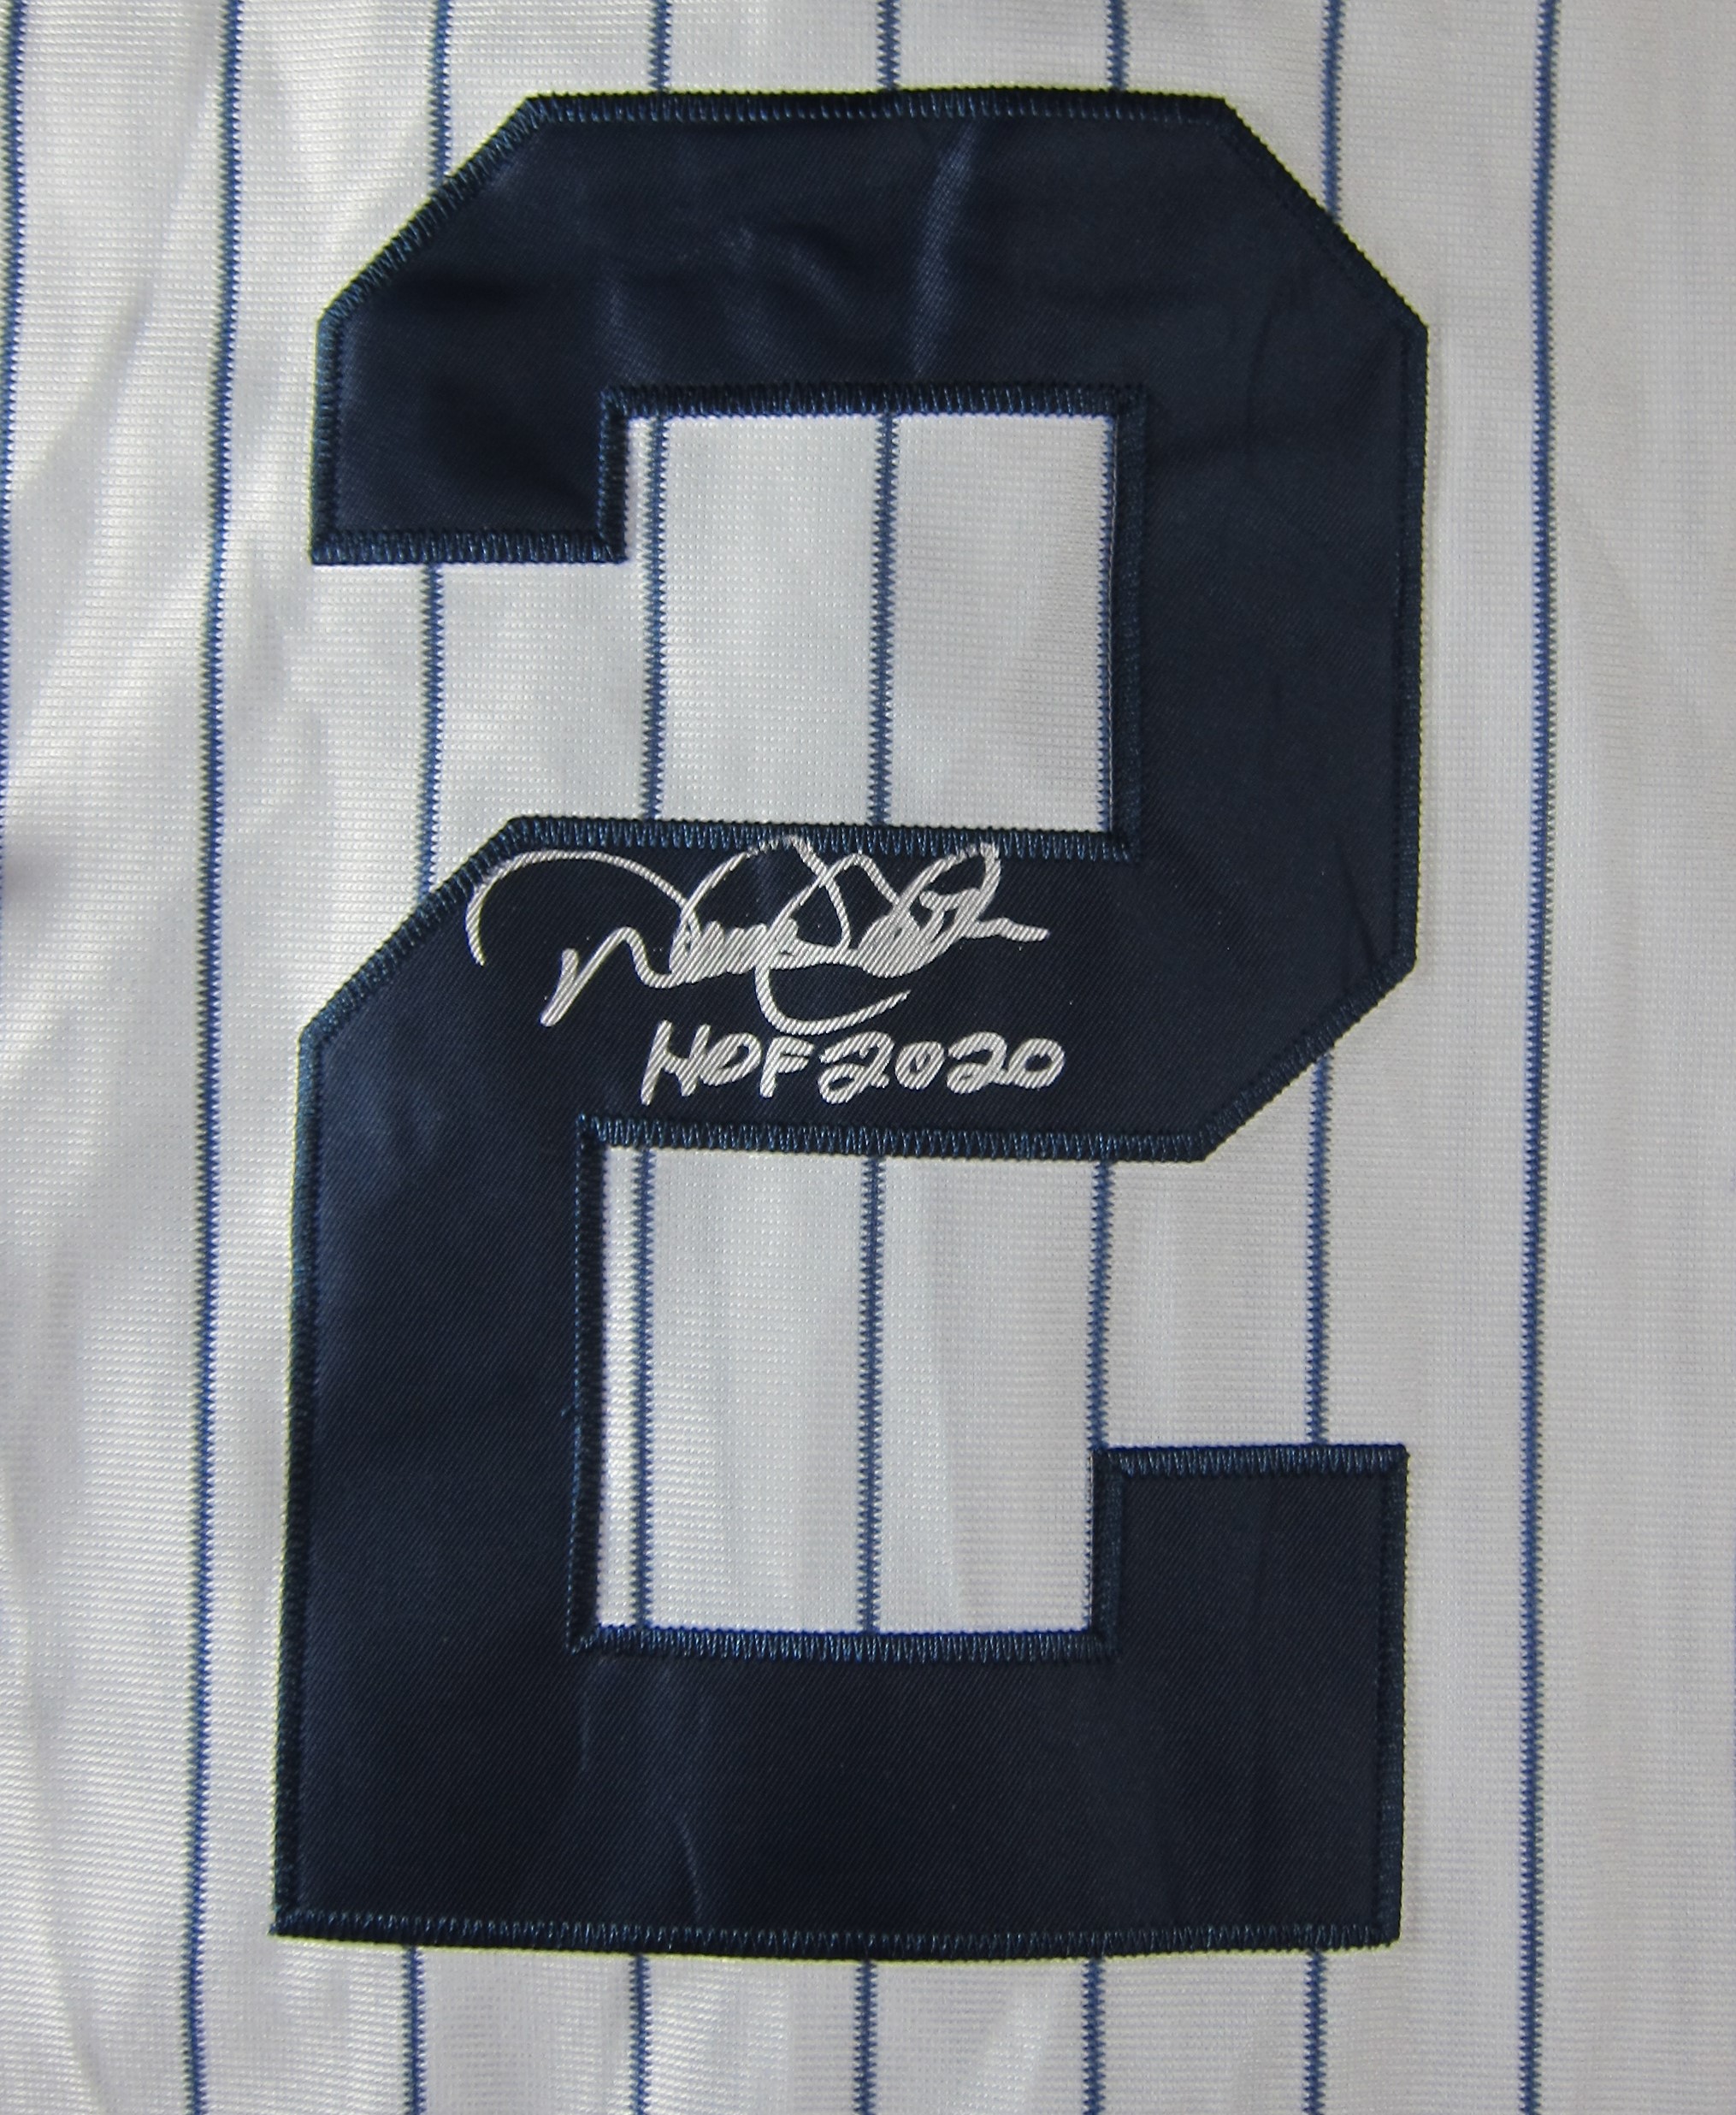 jeter signed jersey